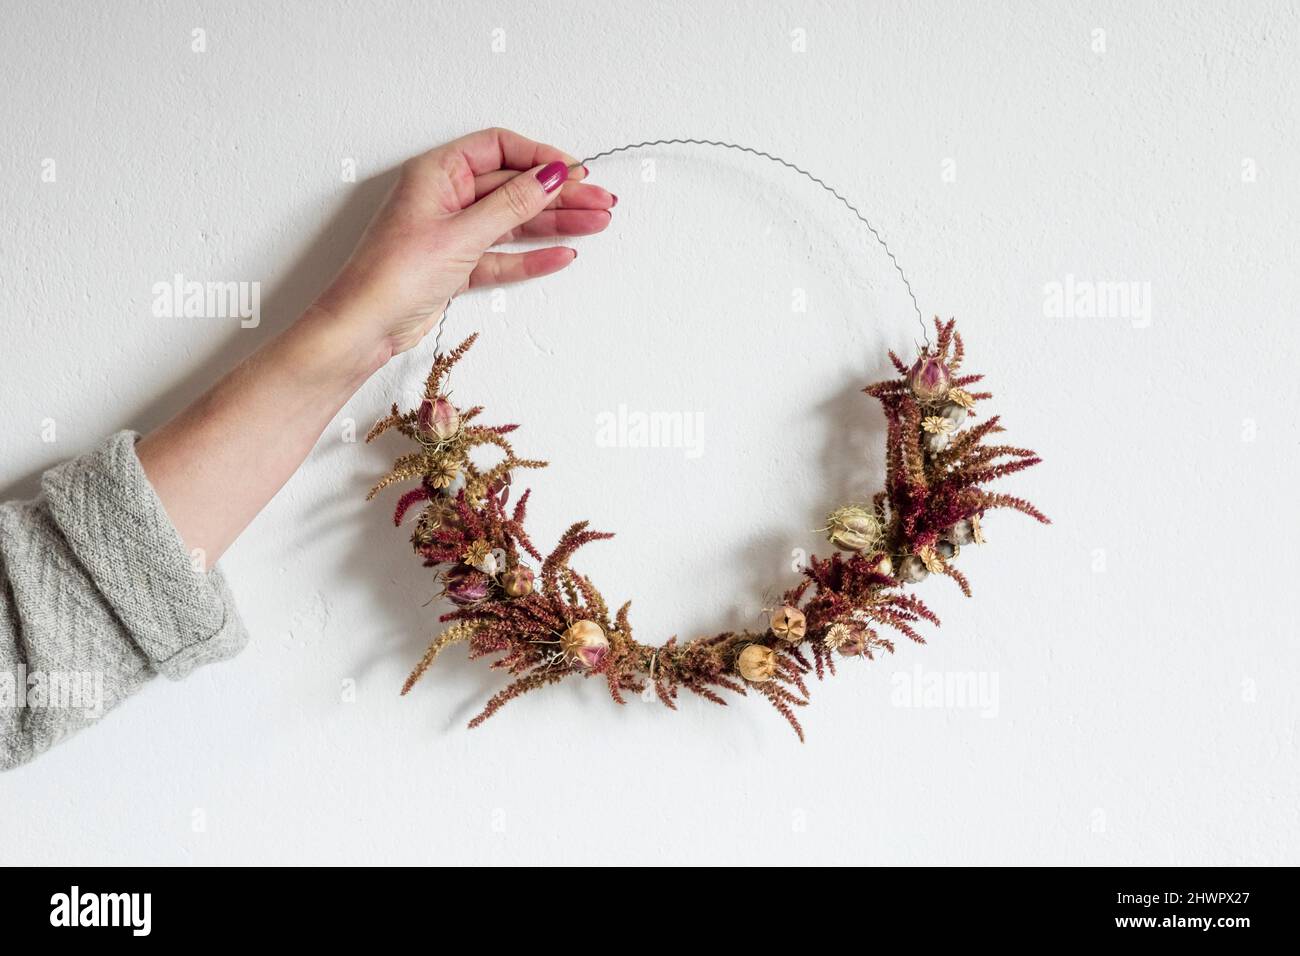 Arm of woman holding wreath made of various dried flowers Stock Photo